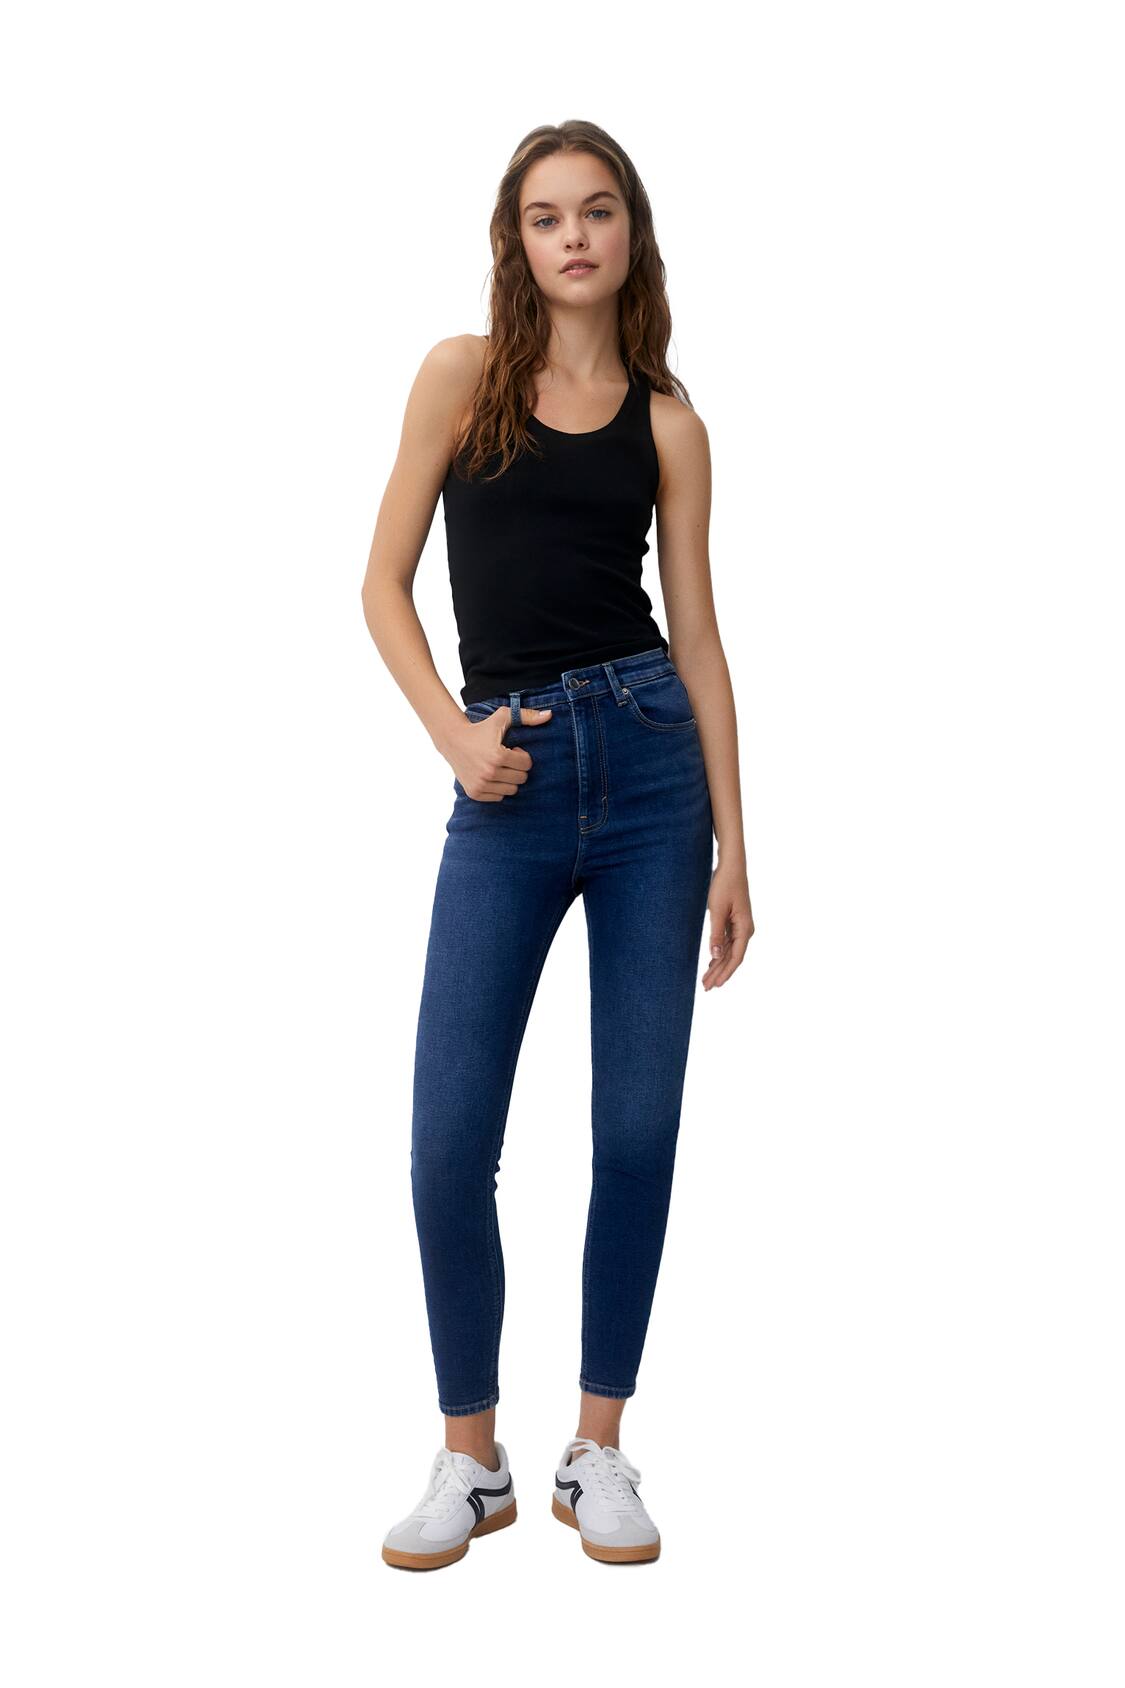 Jeans - Colombianos - Skinny - Mujer - Negro